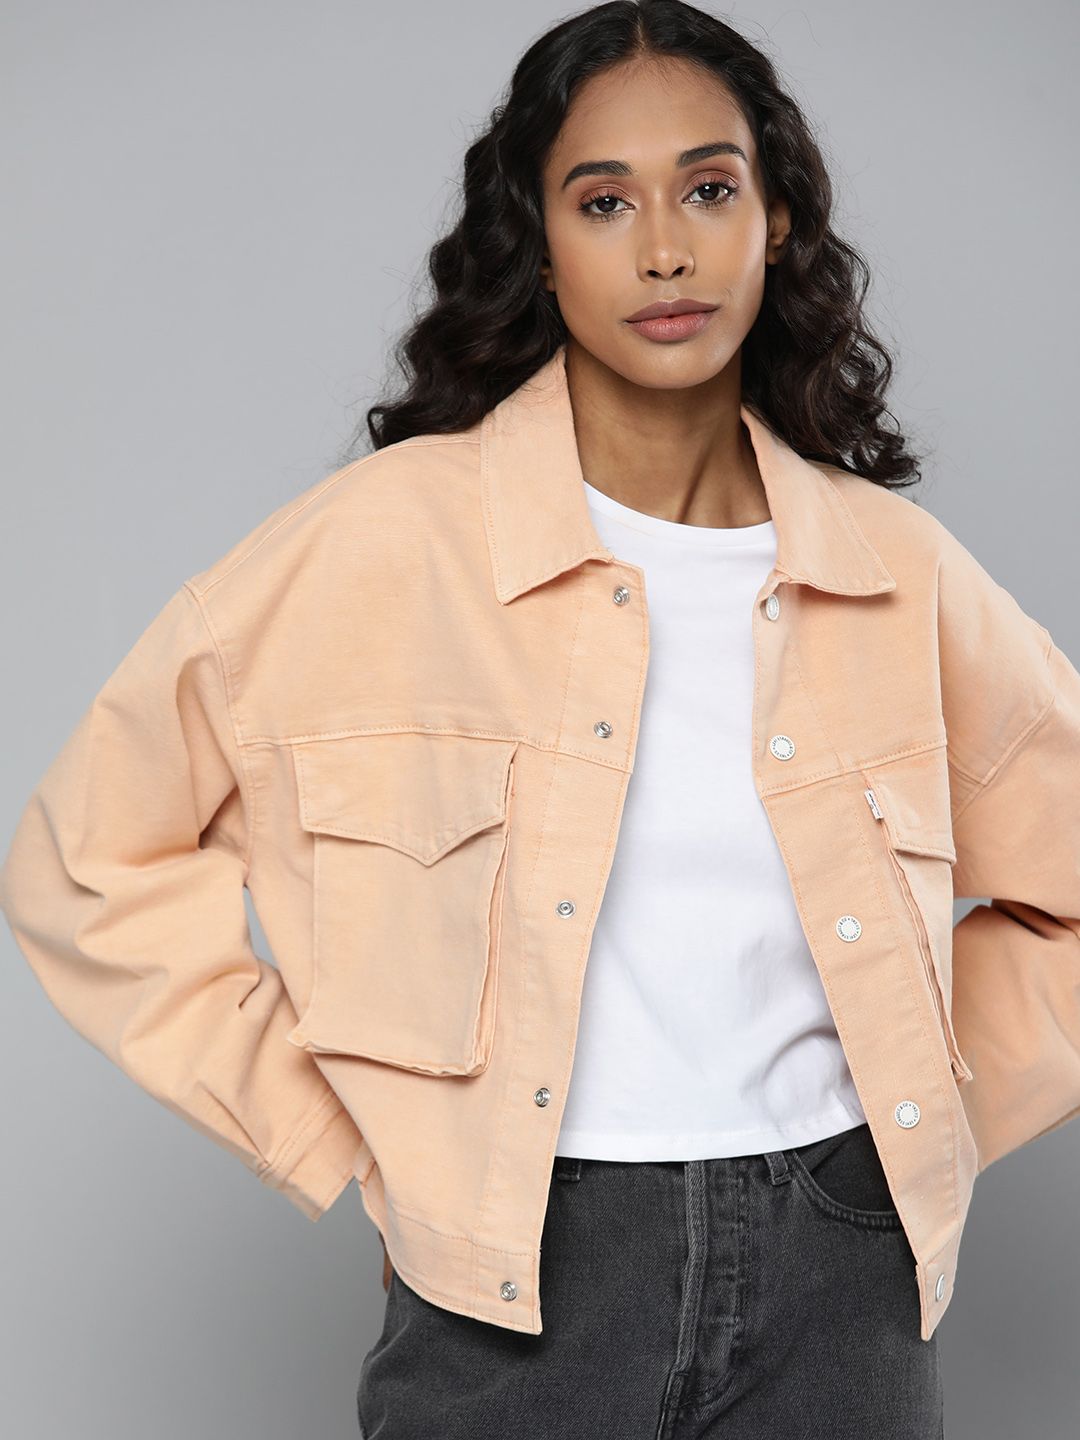 Levis Women Cream-Coloured Solid Tailored Jacket Price in India